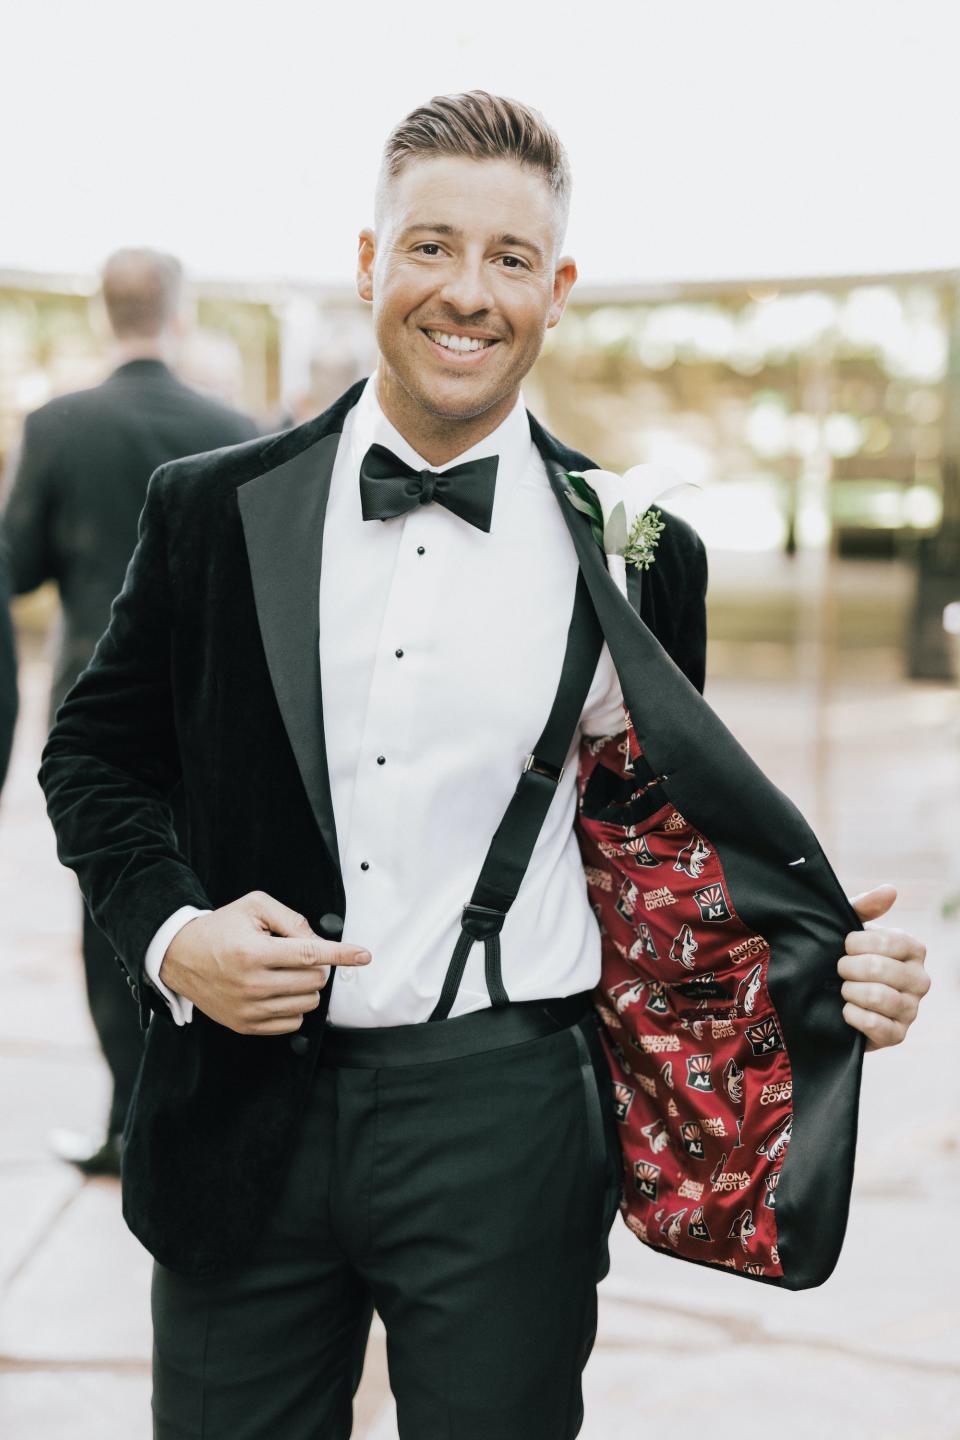 A groom shows off the printed inside of his jacket.